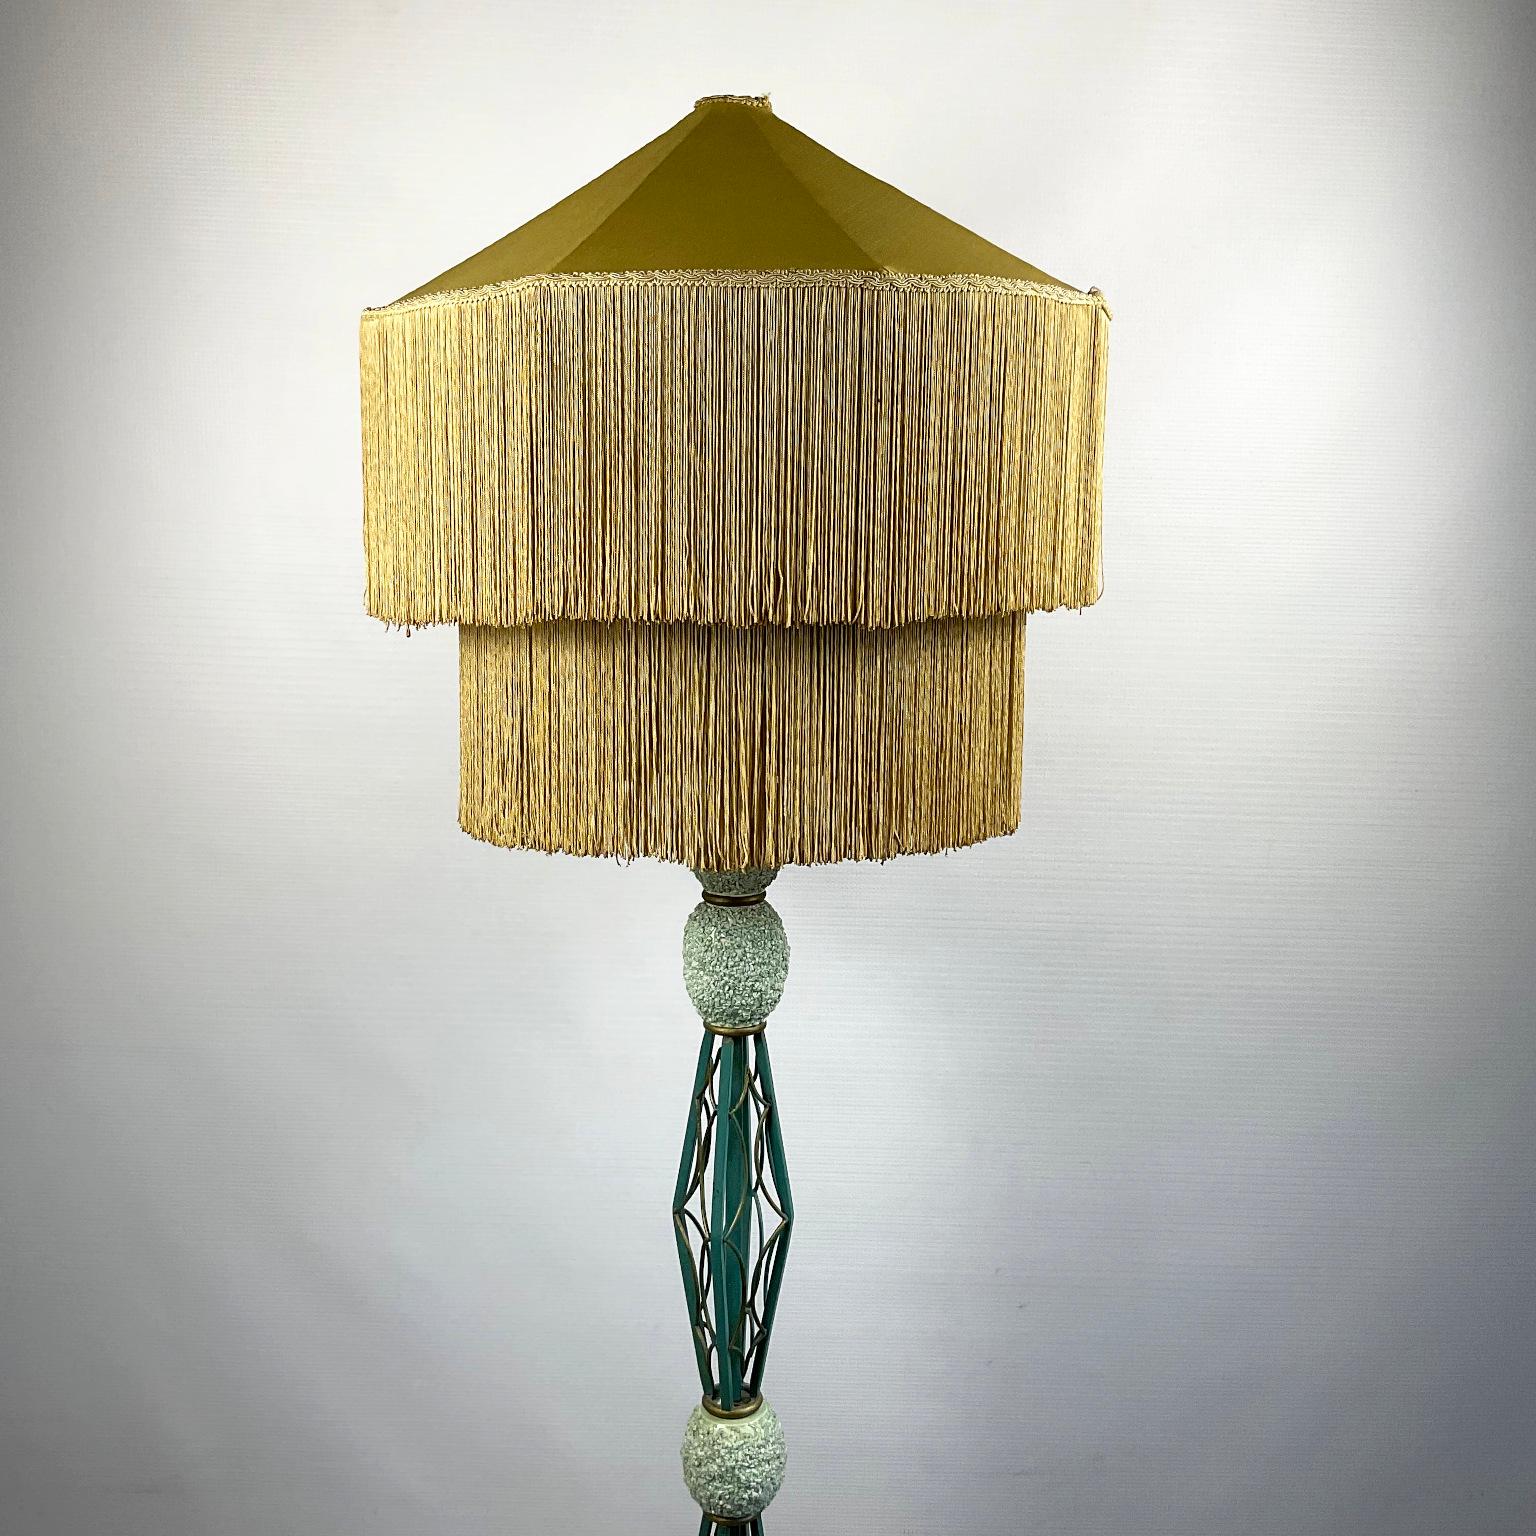 Cold-Painted 1940s French Wrought Iron Floor Lamp with Turquoise and Gold Enamel Finish 